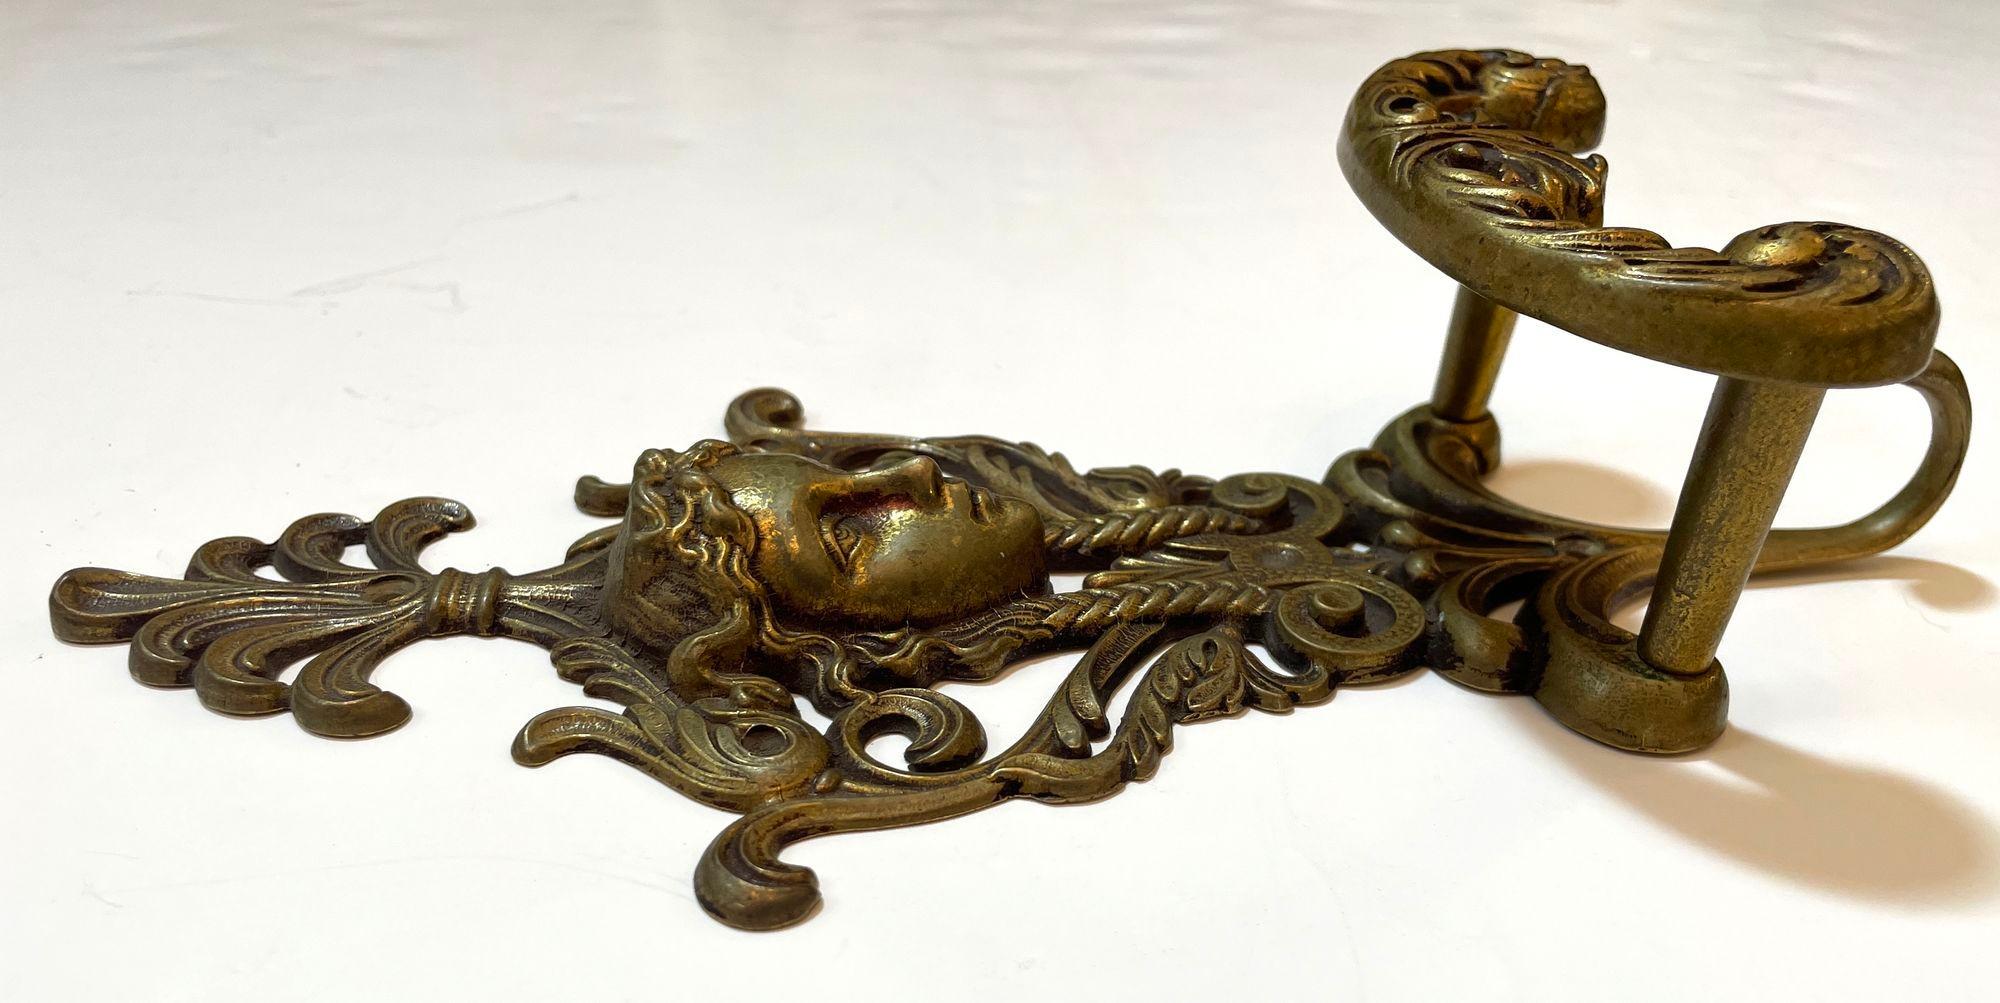 Antique Ornate Italian Figural Architectural Cast Brass Wall Hook Decor Set of 3 For Sale 5